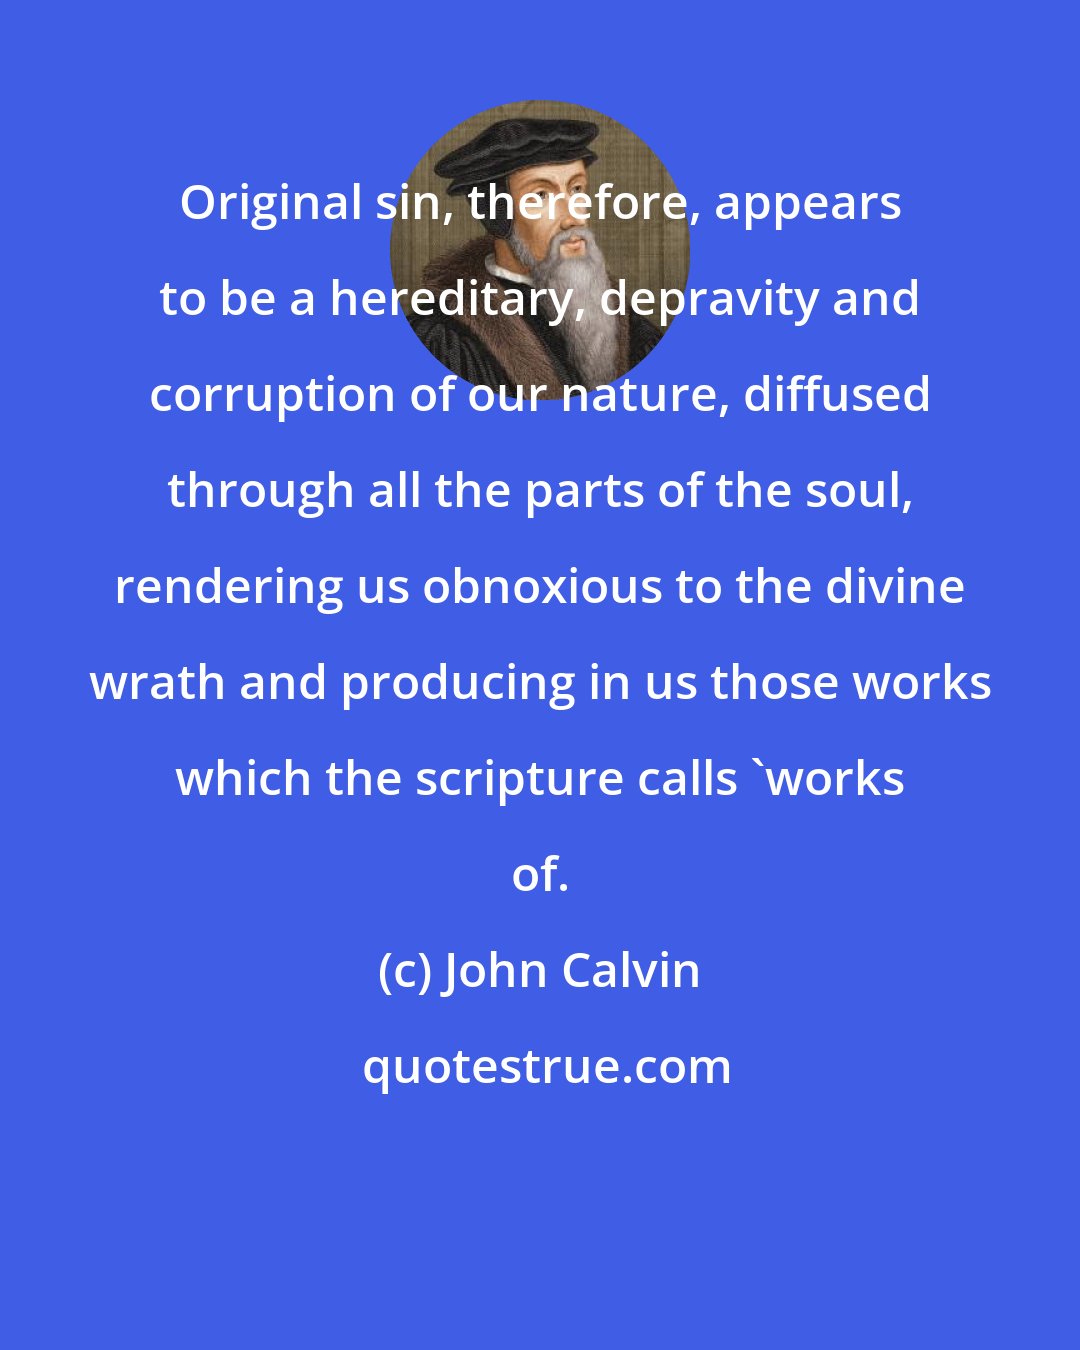 John Calvin: Original sin, therefore, appears to be a hereditary, depravity and corruption of our nature, diffused through all the parts of the soul, rendering us obnoxious to the divine wrath and producing in us those works which the scripture calls 'works of.